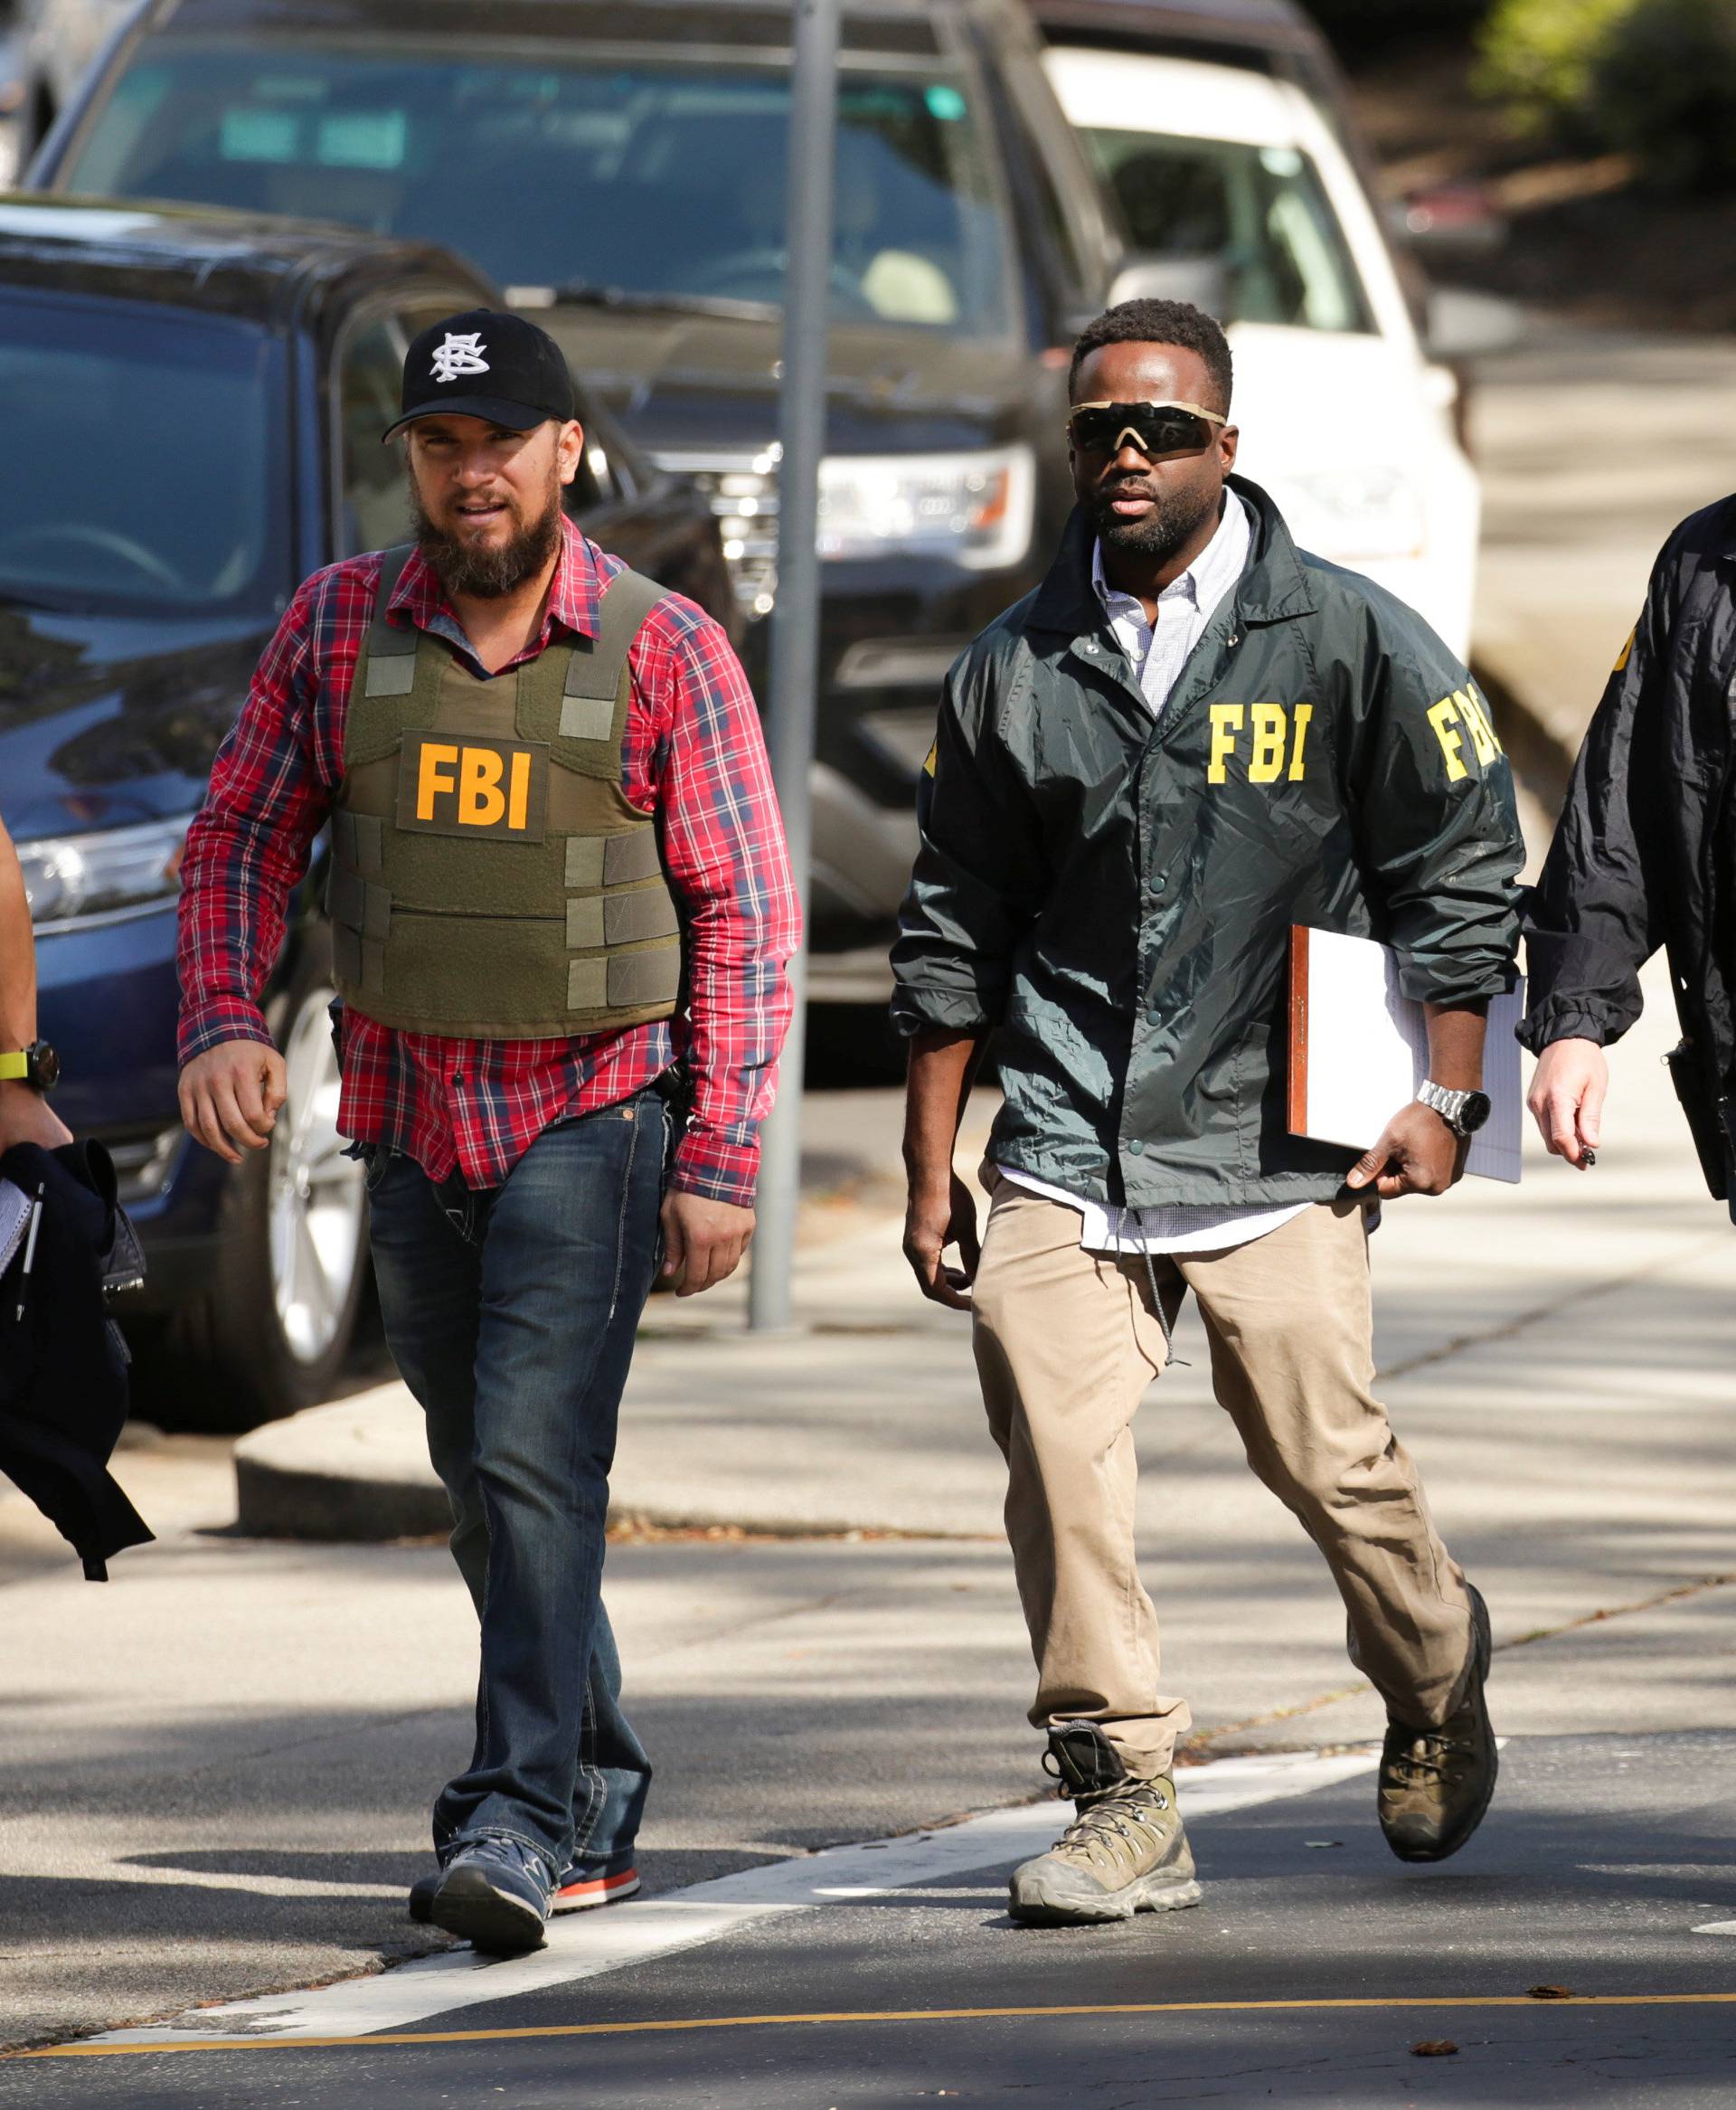 FBI agents are seen near Youtube headquarters following an active shooter situation in San Bruno, California